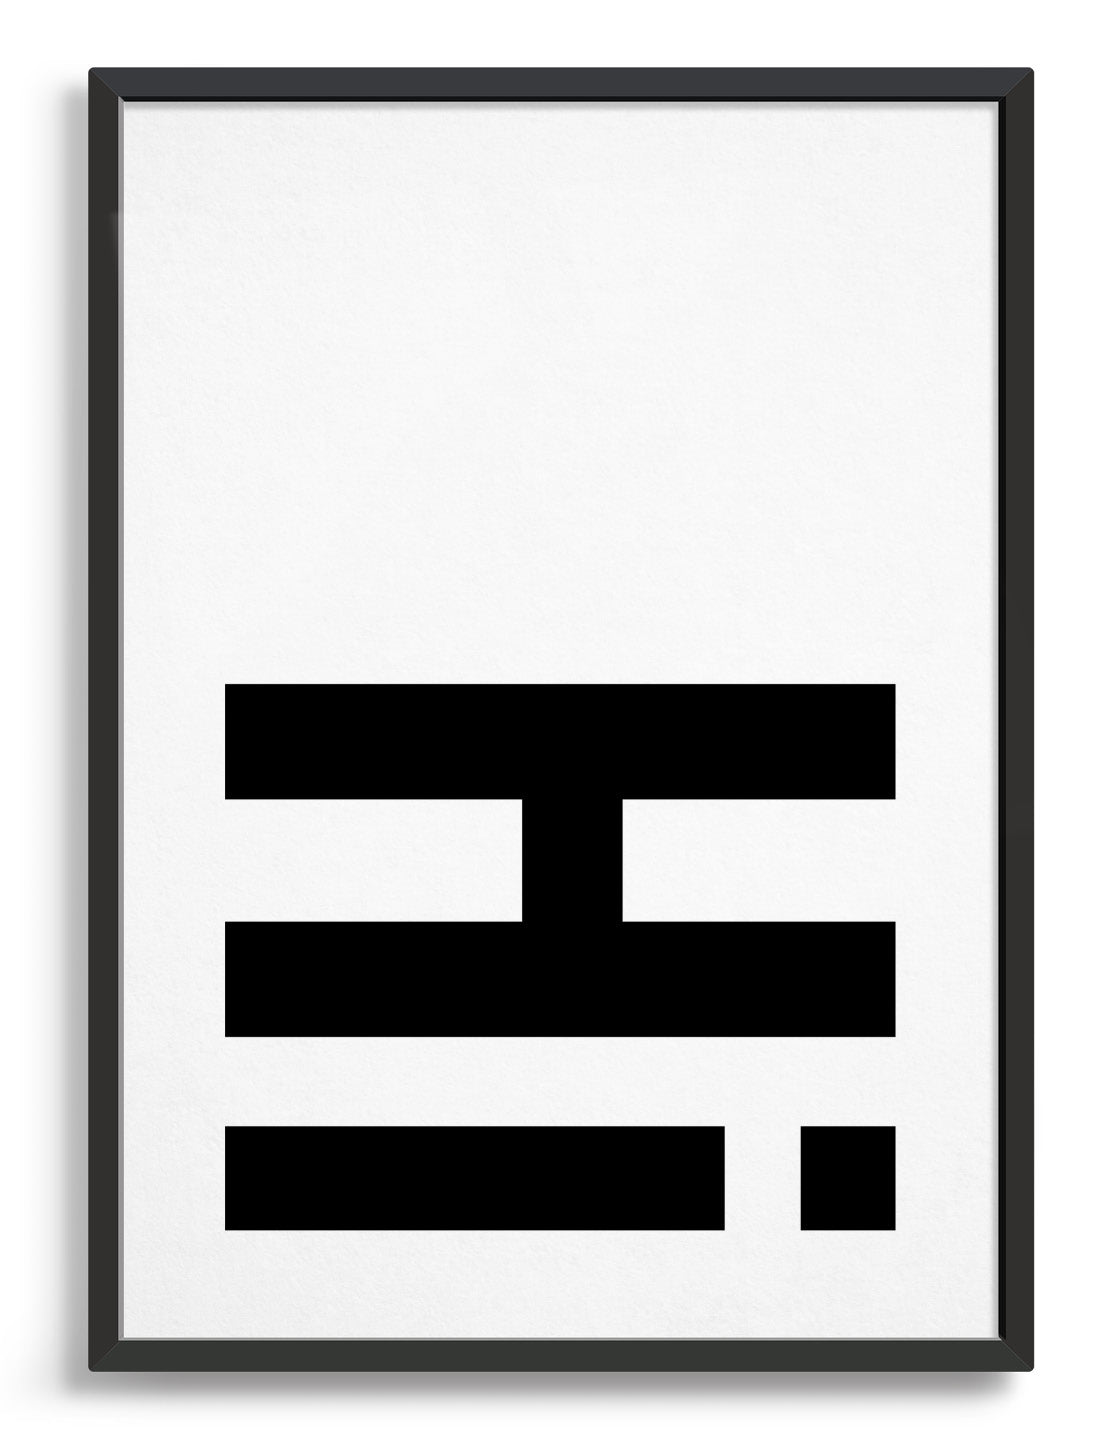 typography art print with hi in black against a white background